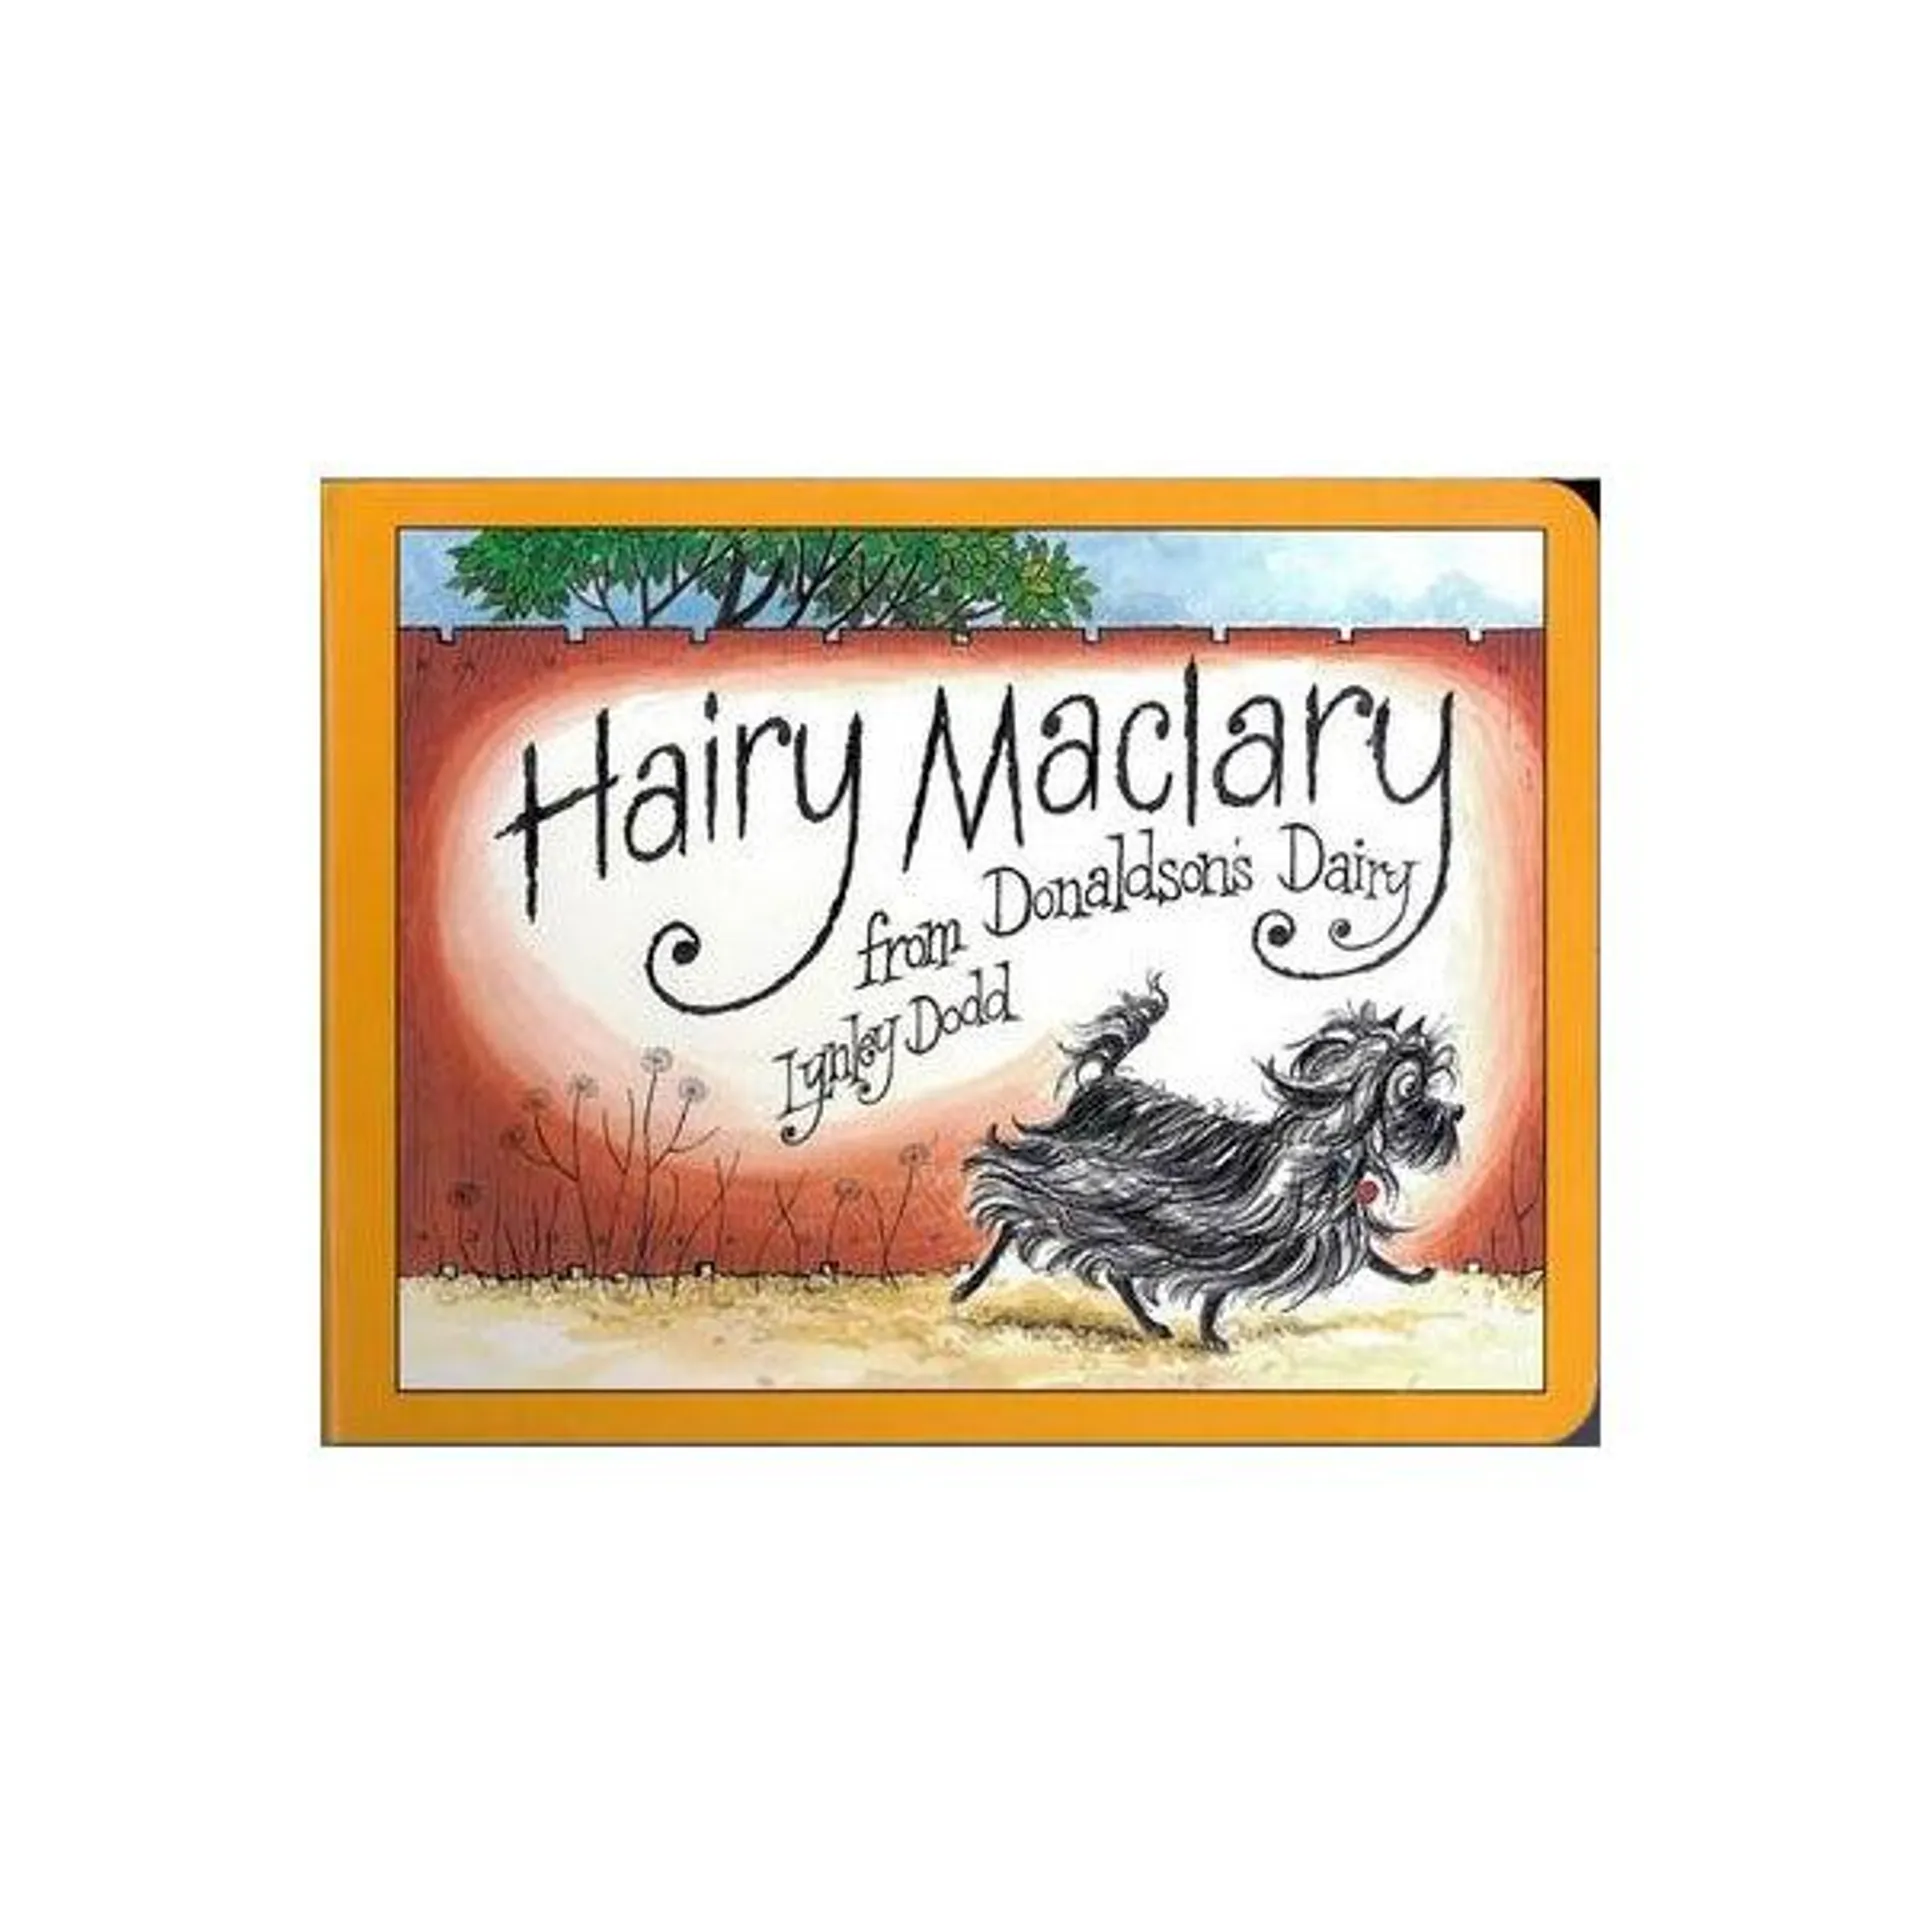 Hairy Maclary from Donaldson's Dairy Board Book